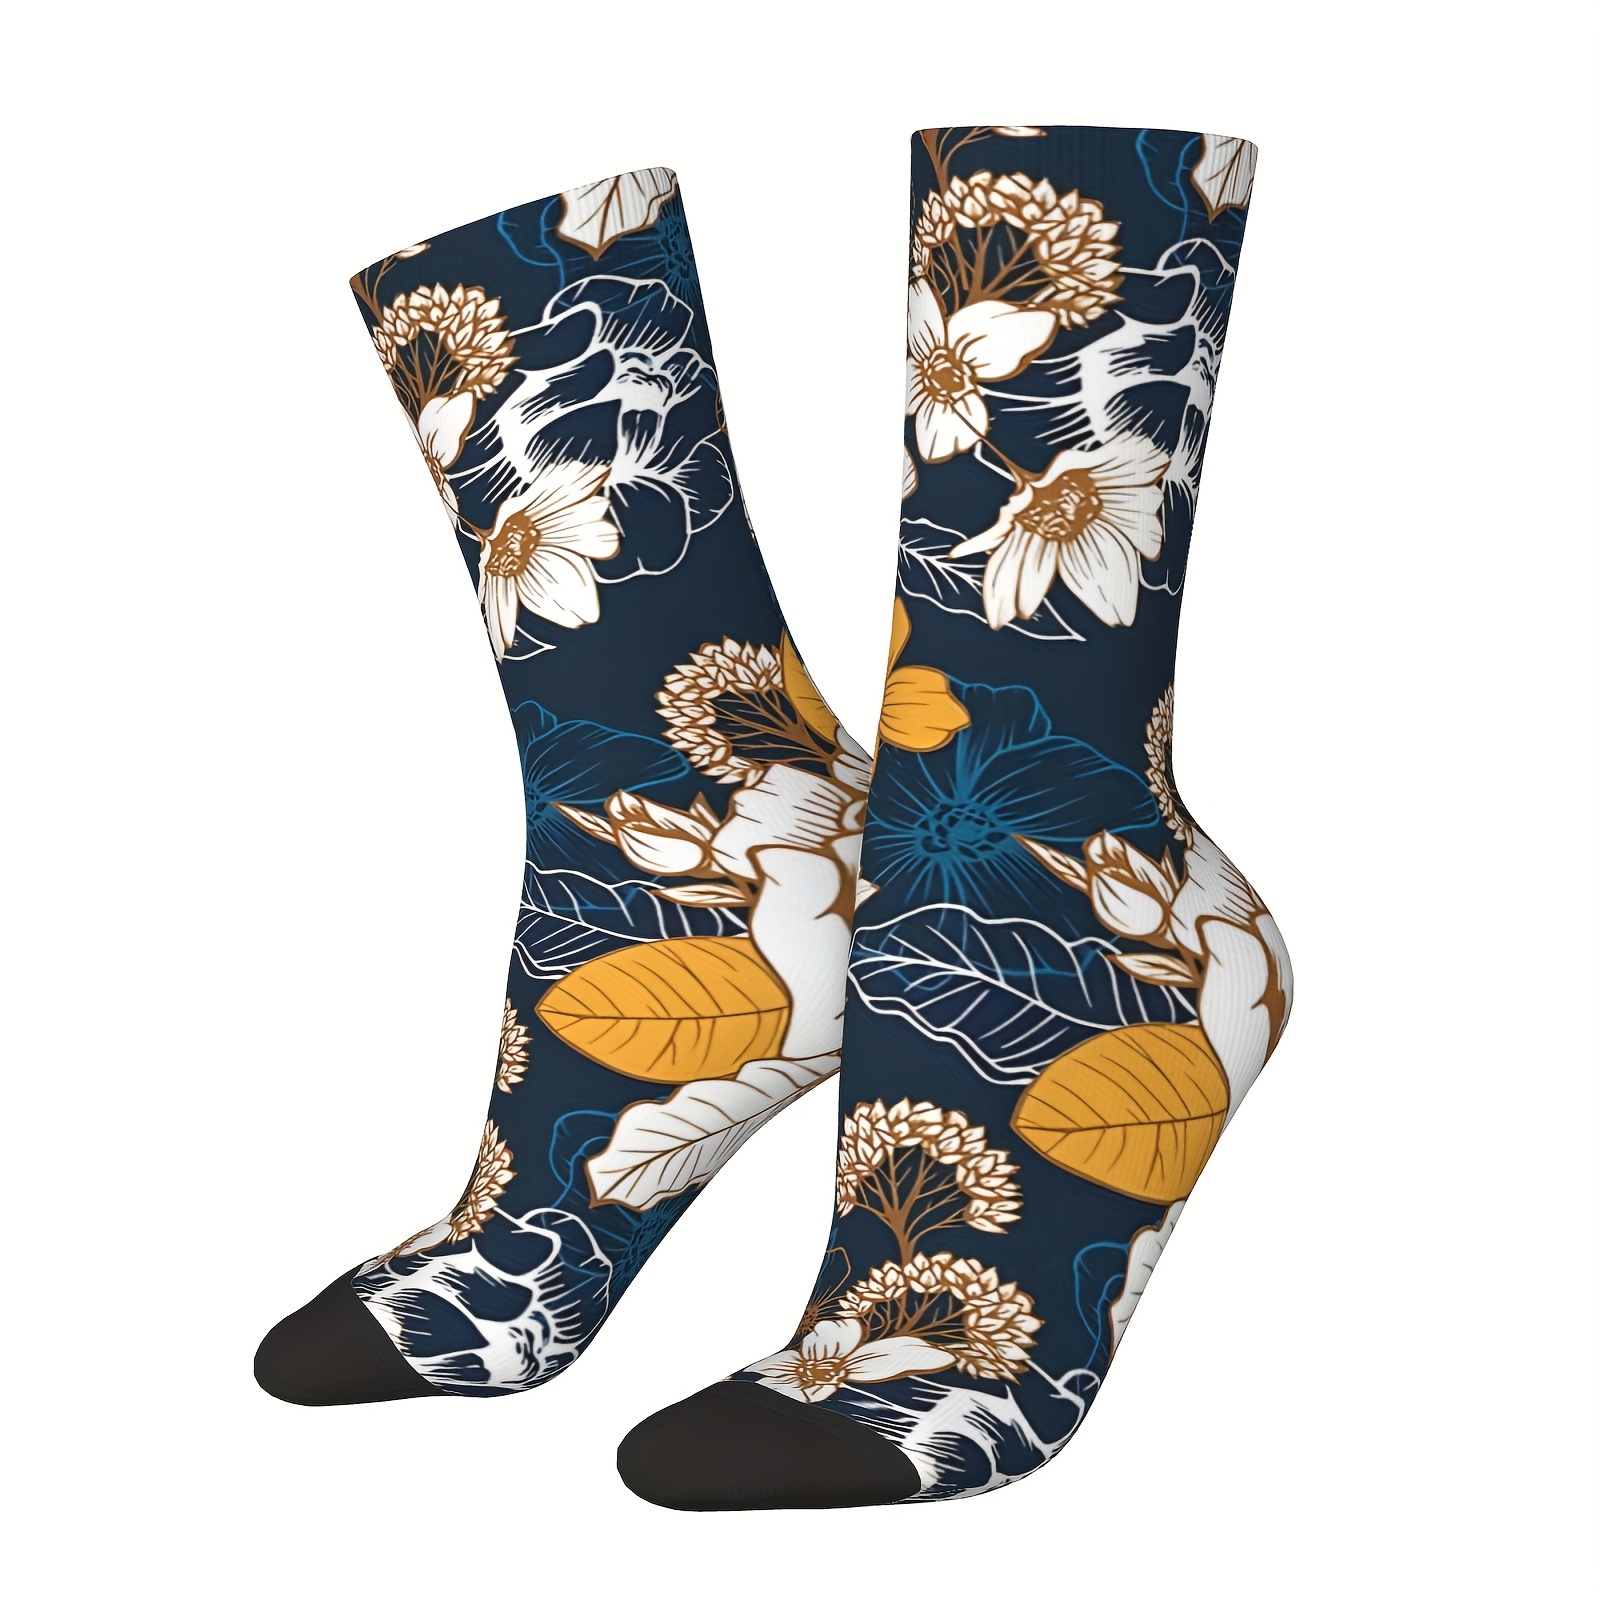 

A Pair Of Men's Trendy Flower Pattern Novelty Crew Socks, Comfy Breathable Casual Soft Socks For Men's Outdoor Activities